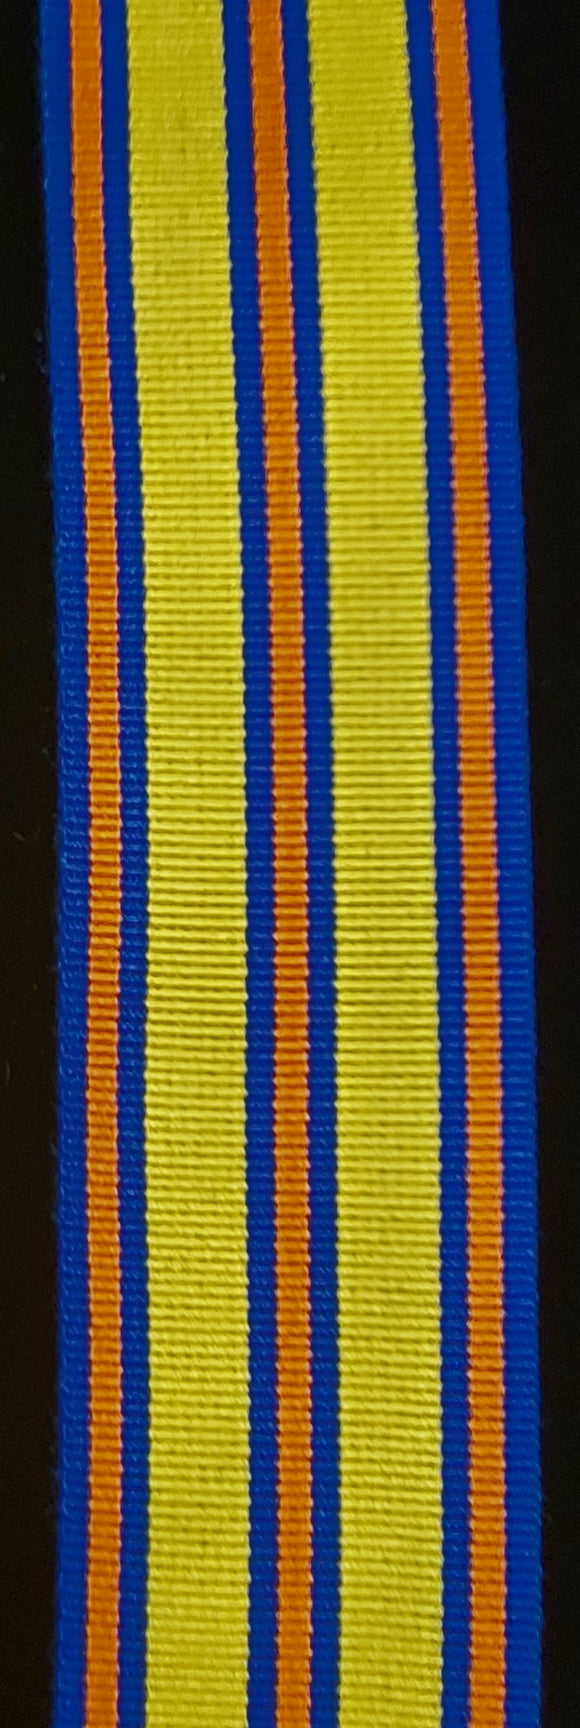 Ribbon, Canadian EMS Exemplary Service Medal